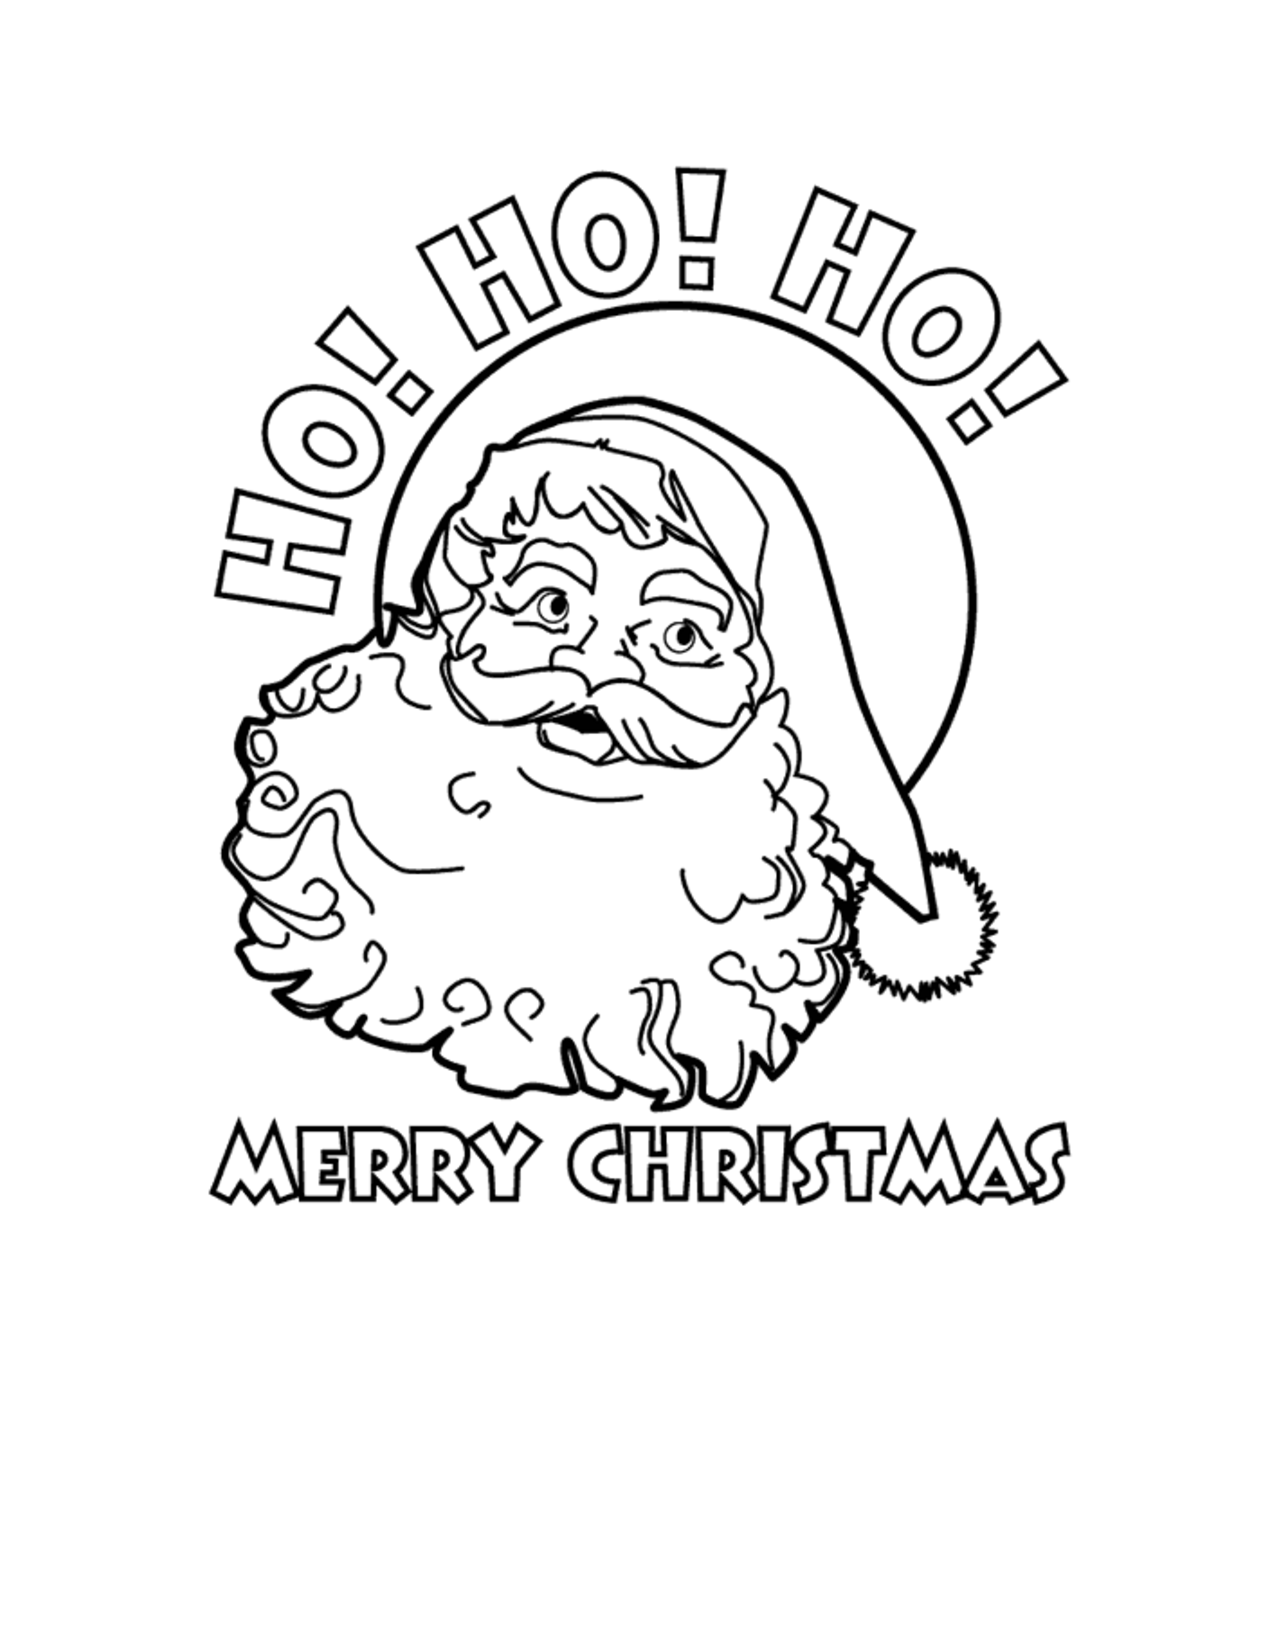 Free Merry Christmas Coloring Printable Pages - Coloring Page